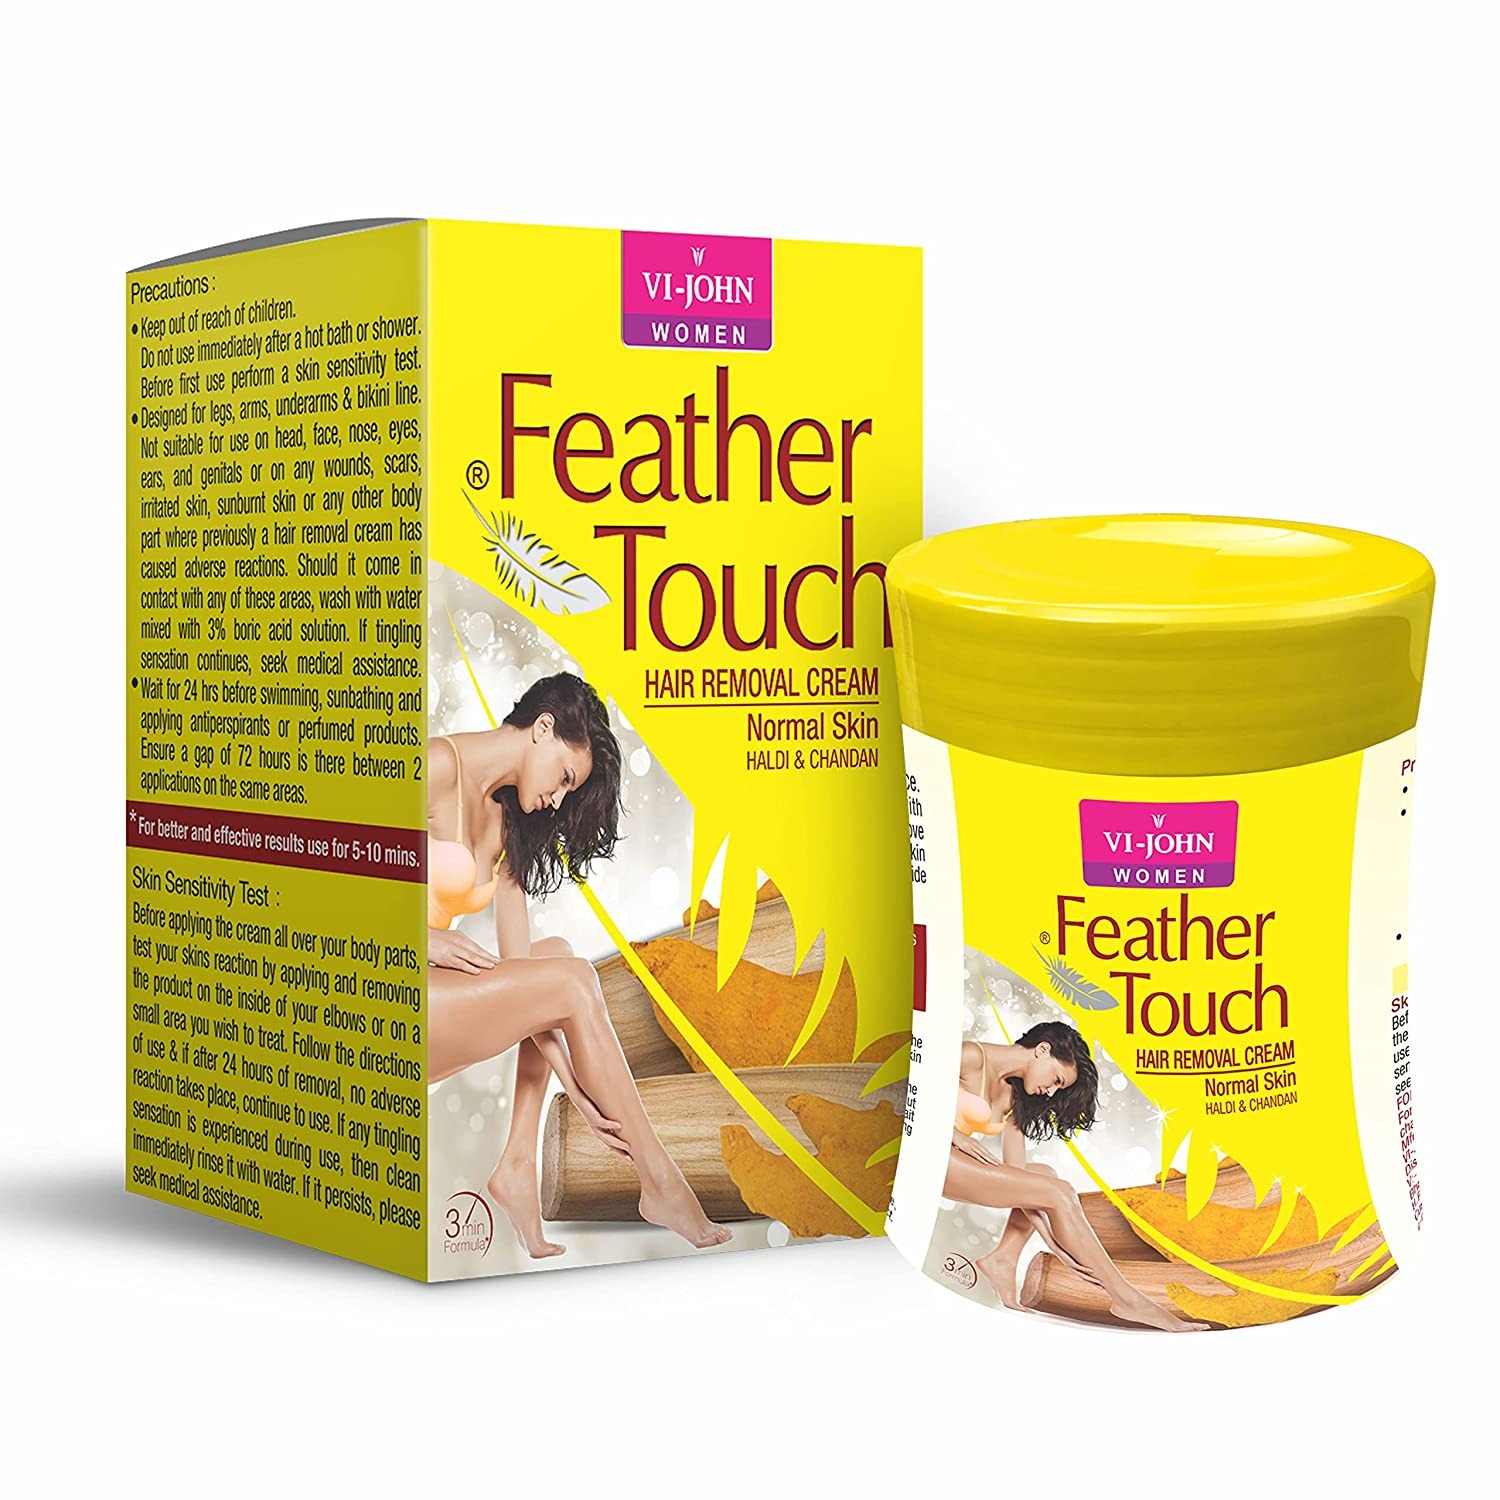 ViJohn Women Feather Touch Hair Removal Cream For Normal Skin With Haldi   Chandan  40 Gm